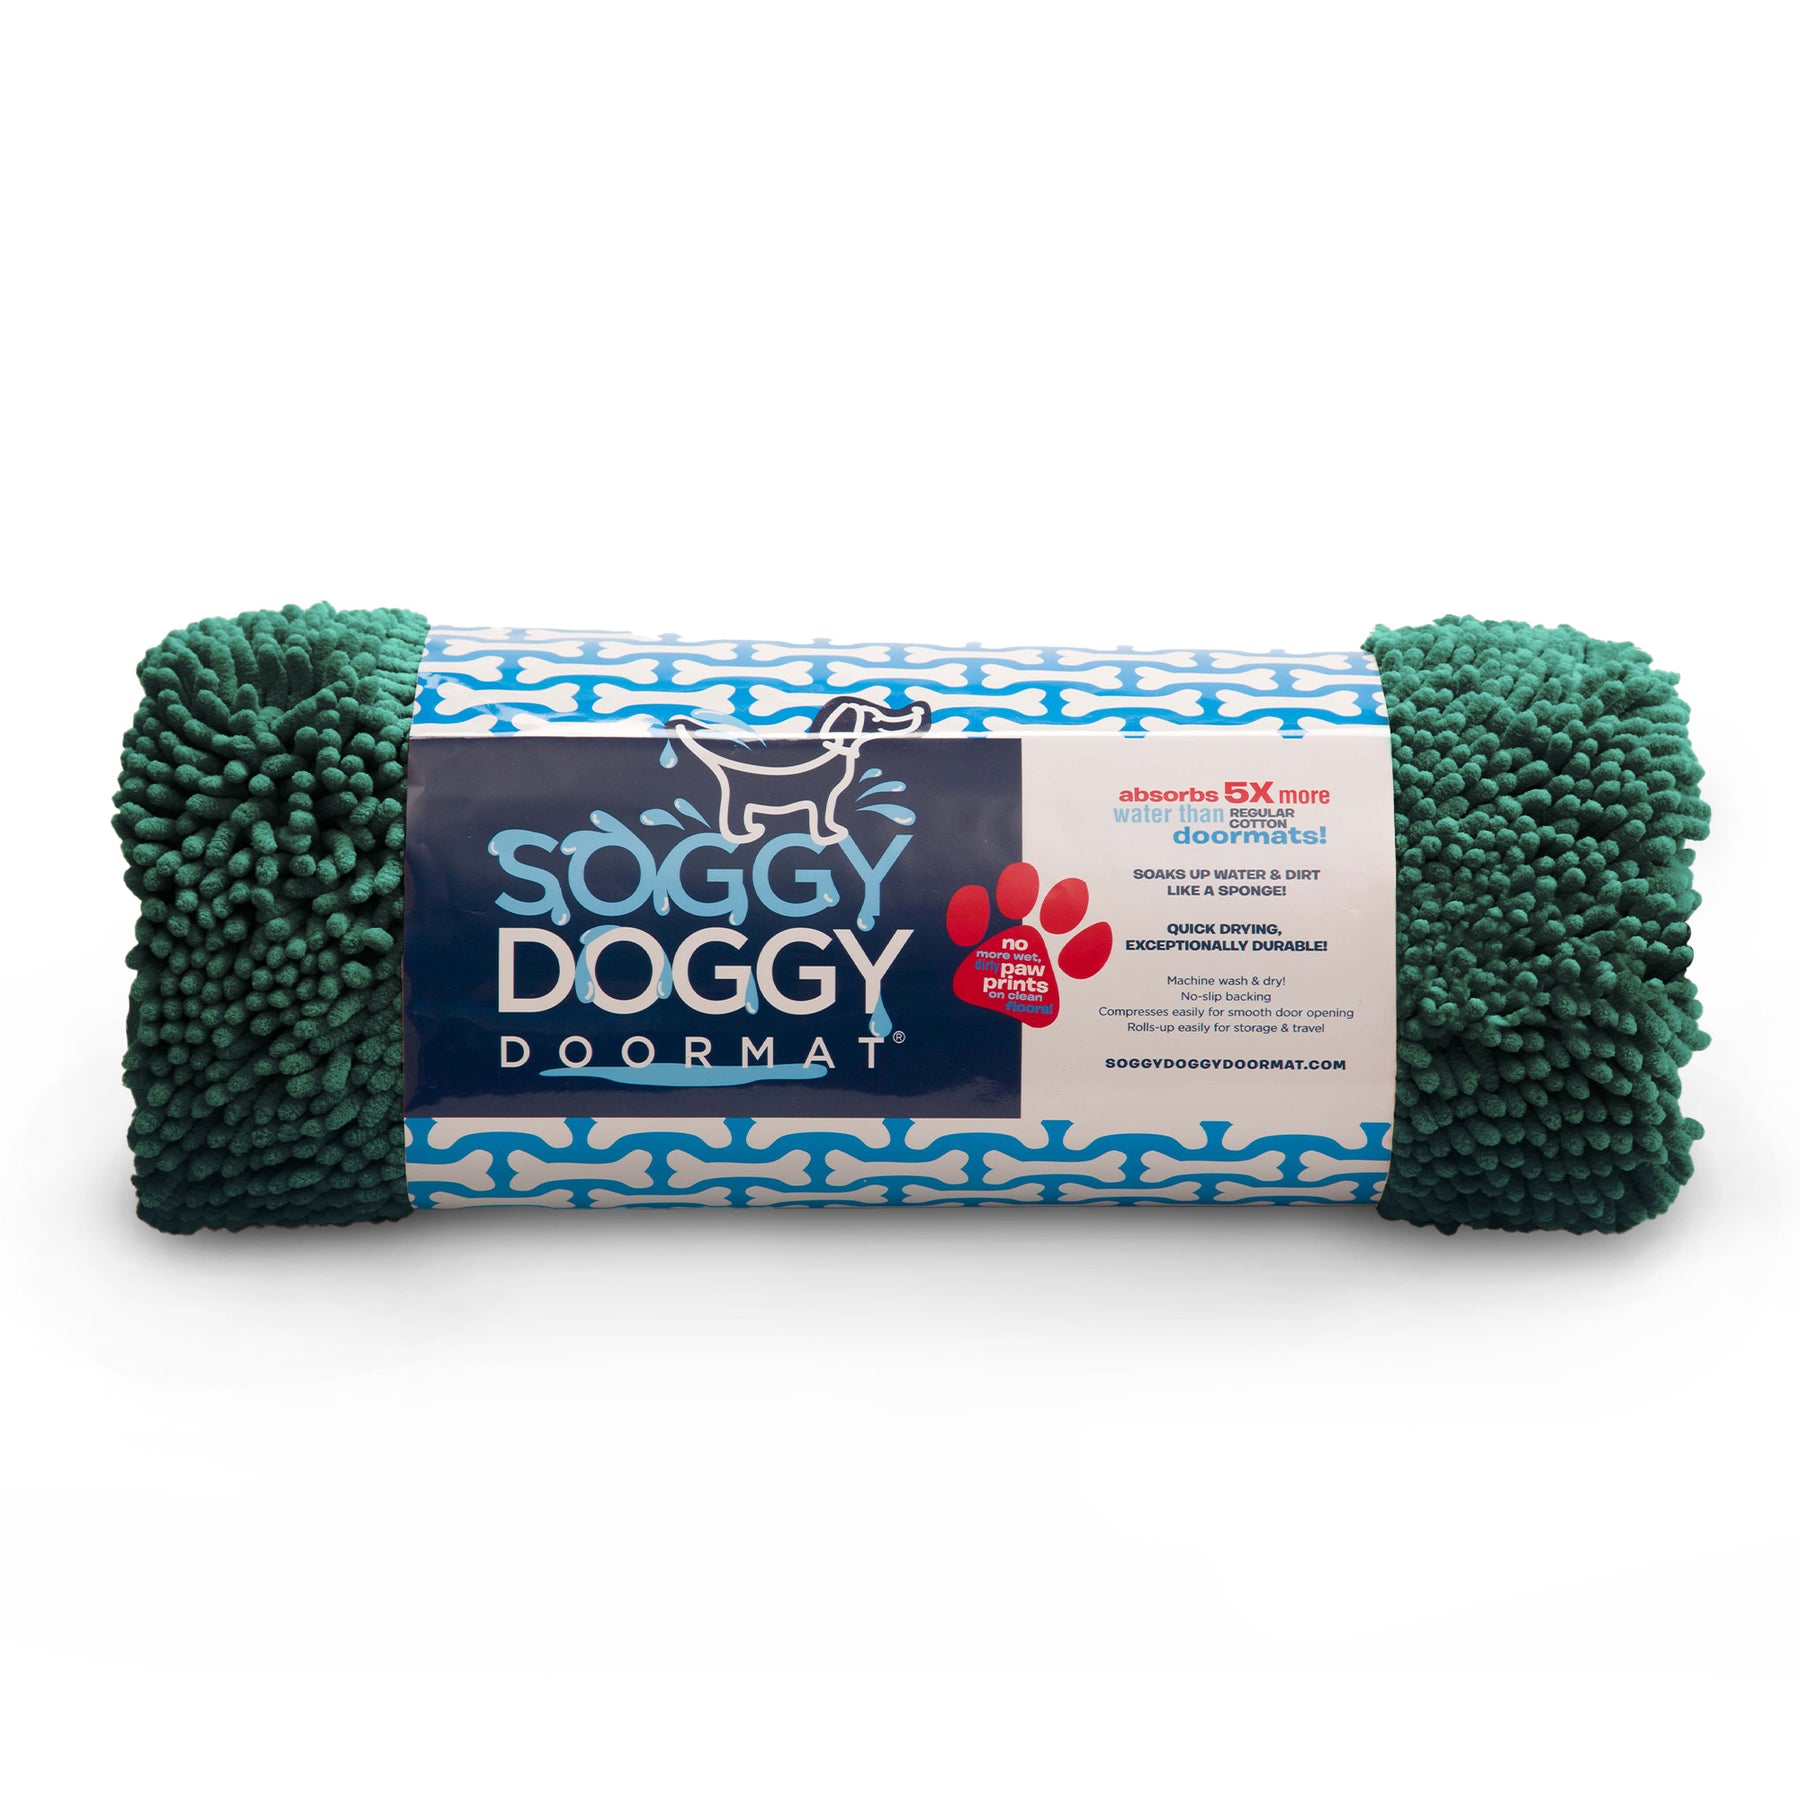 Soggy Doggy Bone Absorbent Doormat - Beige - L Delivery in Clarksville, TN